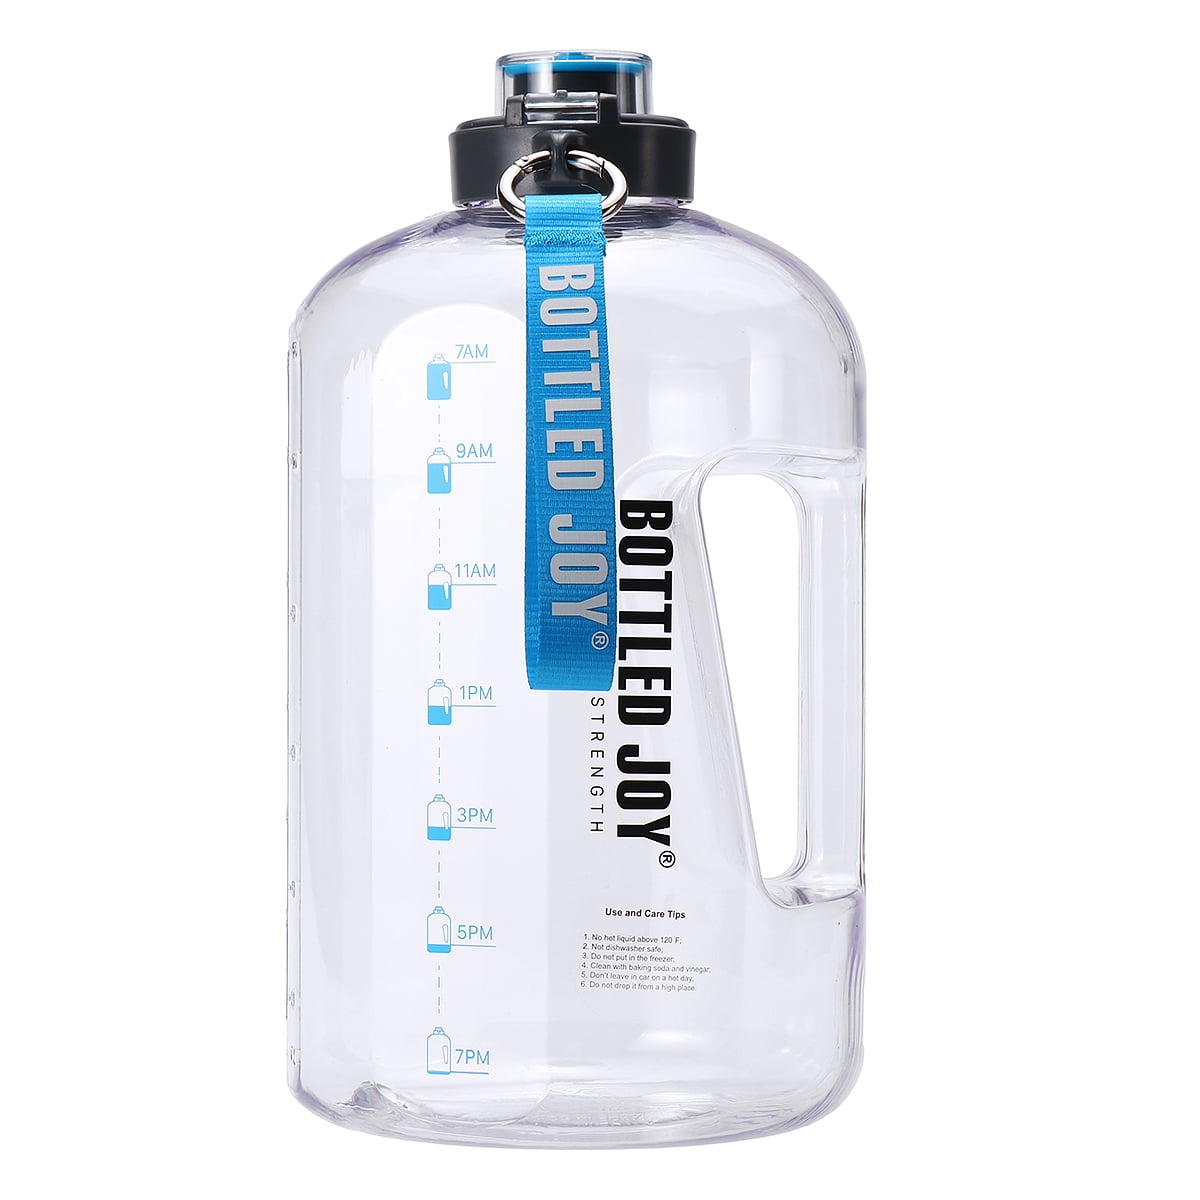 BPA Free Large Water Bottle Hydration with Motivational Time Marker Reminder Leak-Proof Drinking Big Water Jug for Camping Sports Workouts and Outdoor Activity BOTTLED JOY 1 Gallon Water Bottle 